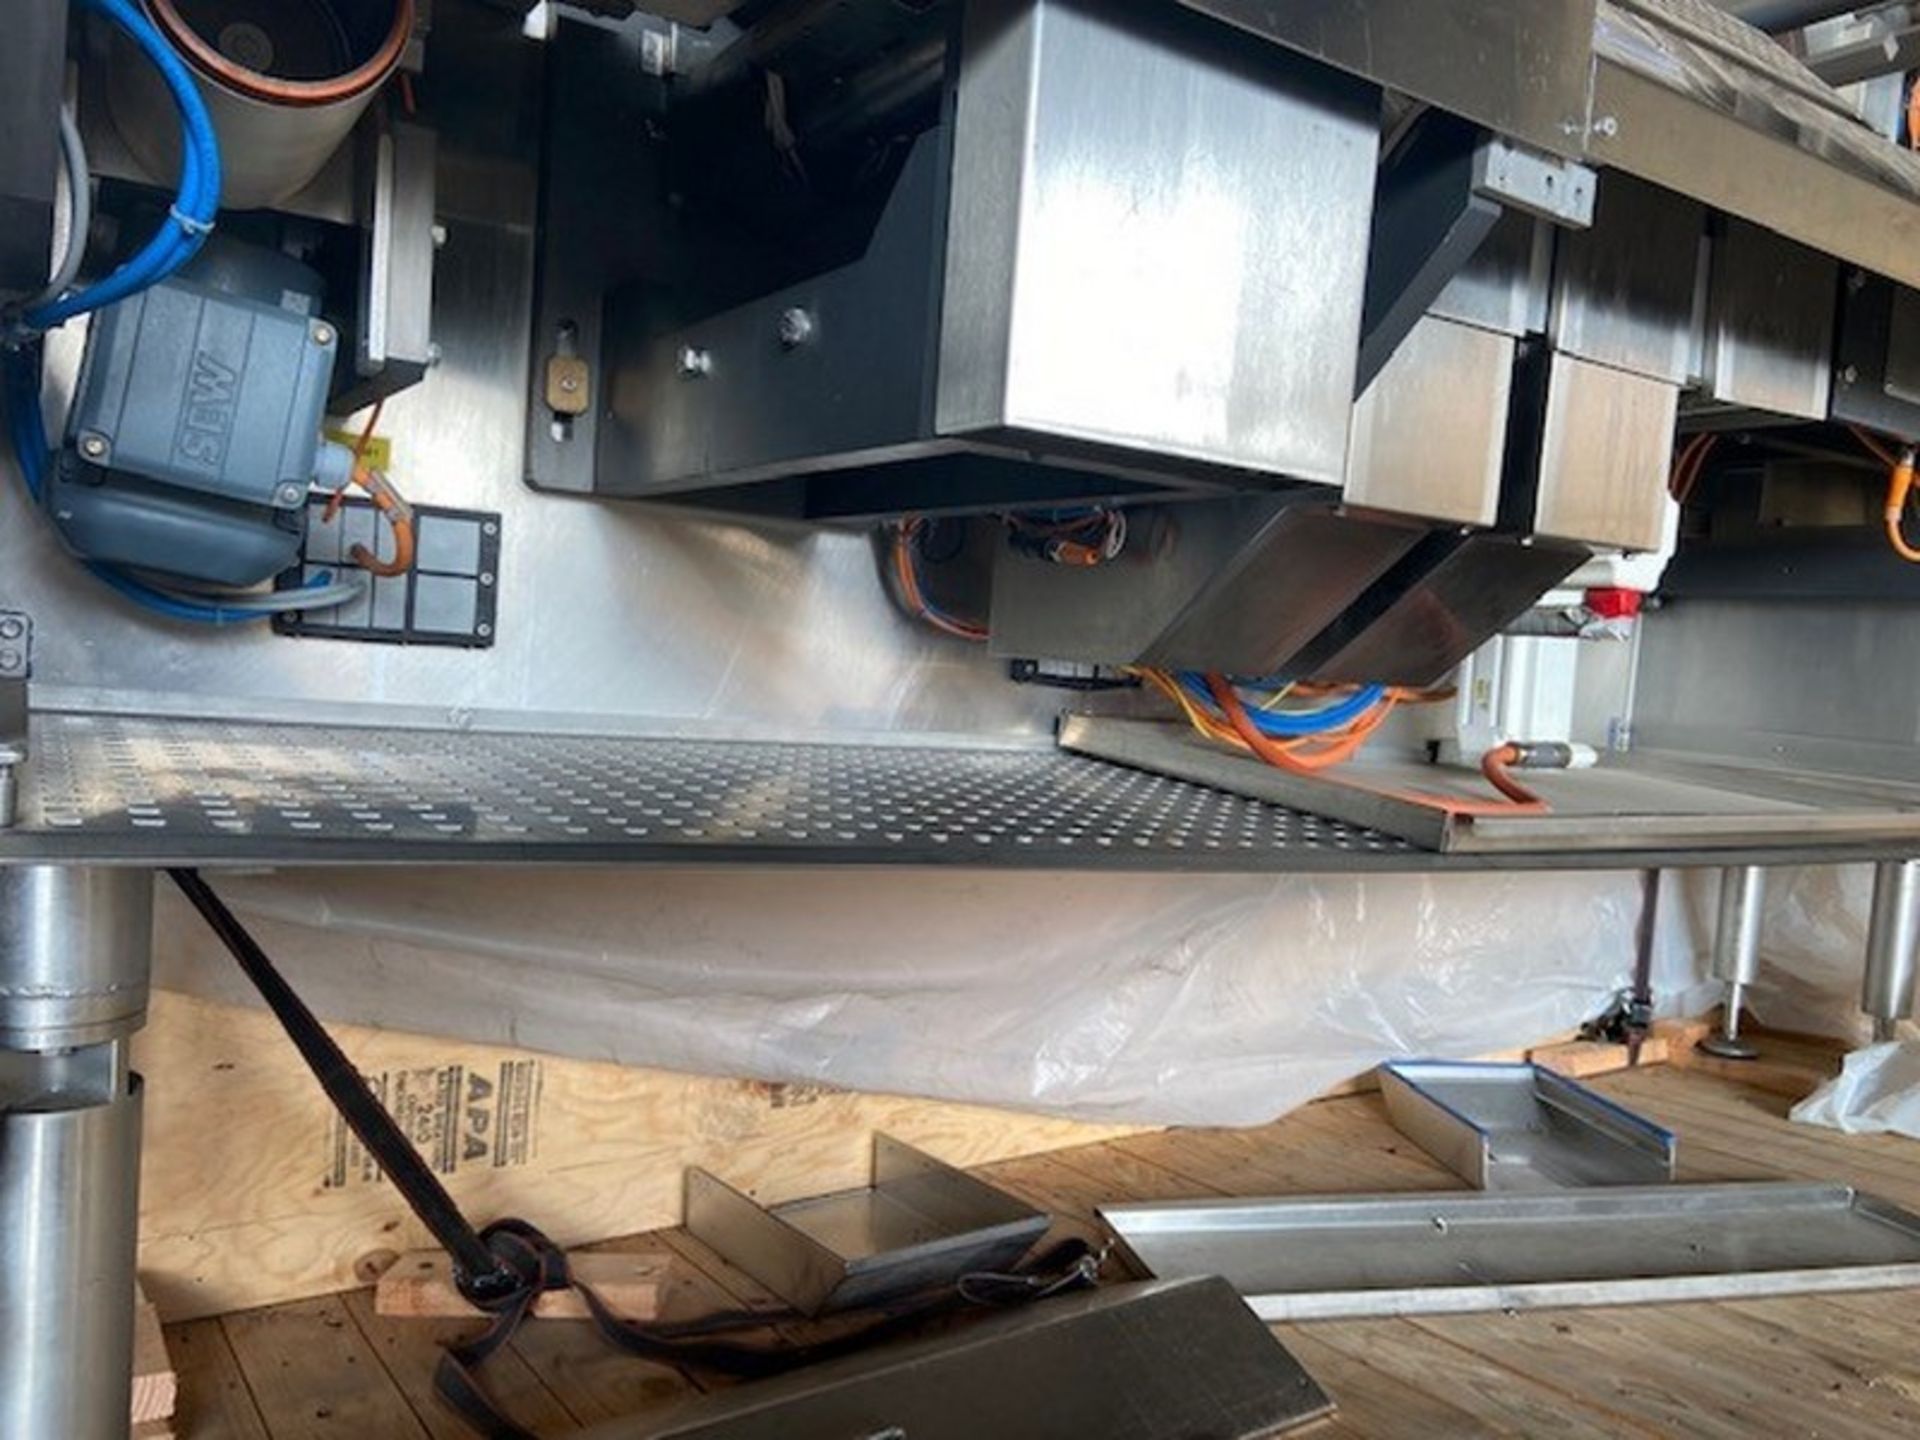 2019 CT Pack Single Lane Flow Wrapper with Additional Infeed Conveyor (Approx. $350,000), Model - Image 9 of 19